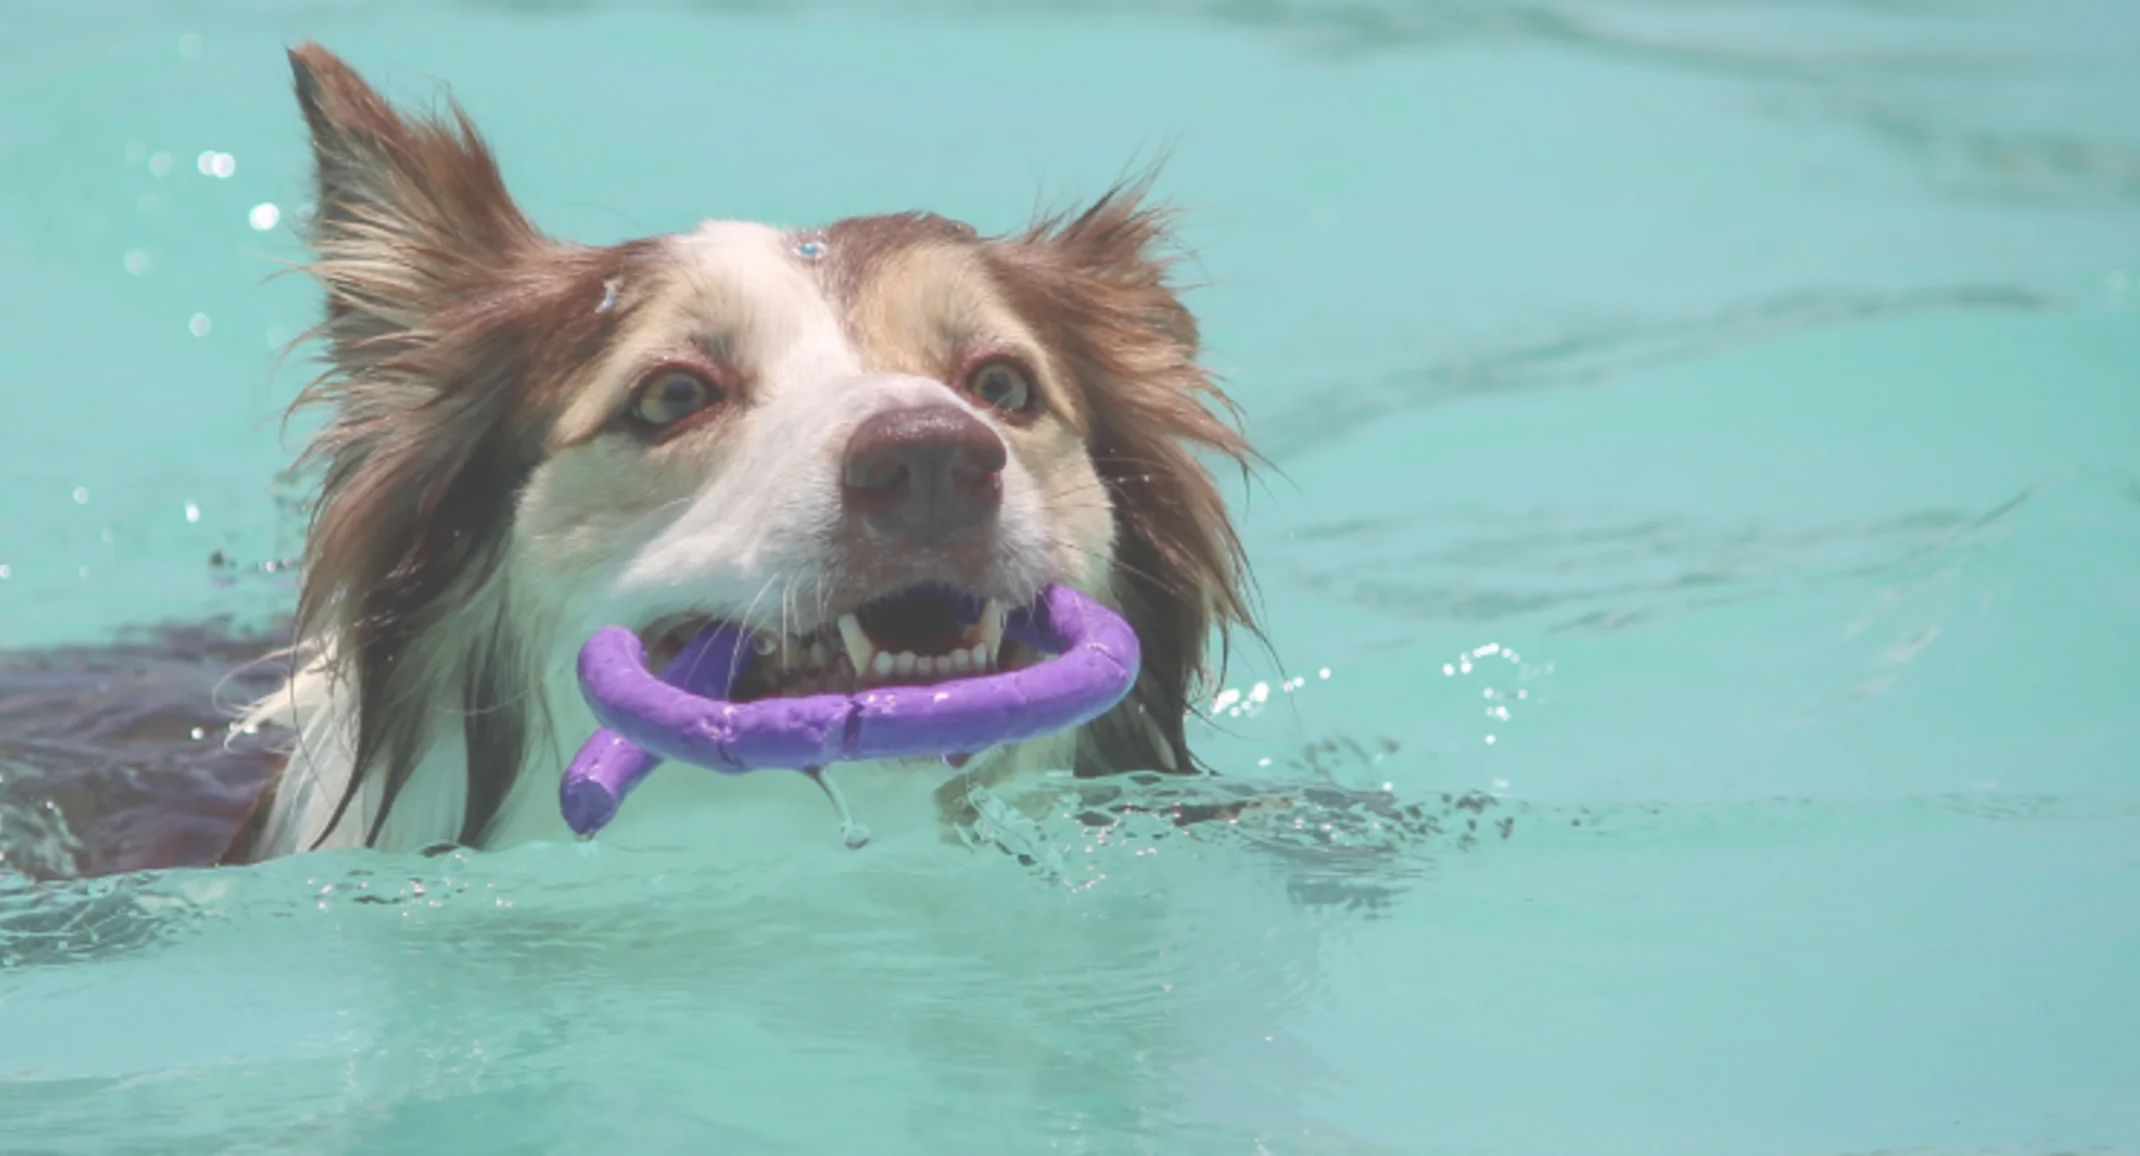 Dog swimming in a pool with a toy in his mouth